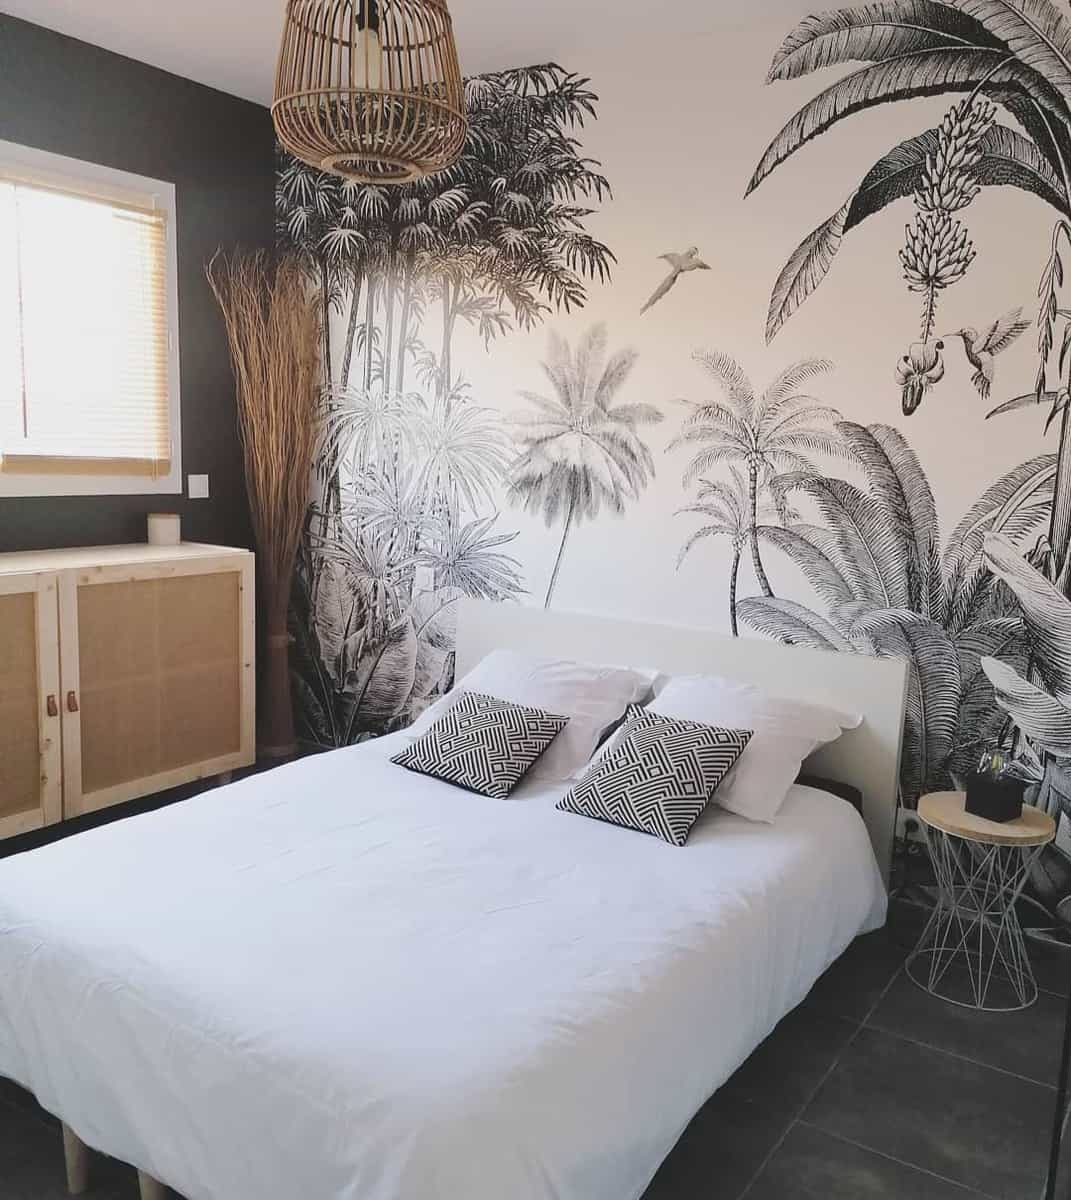 Tropical island wallpaper for the bedroom